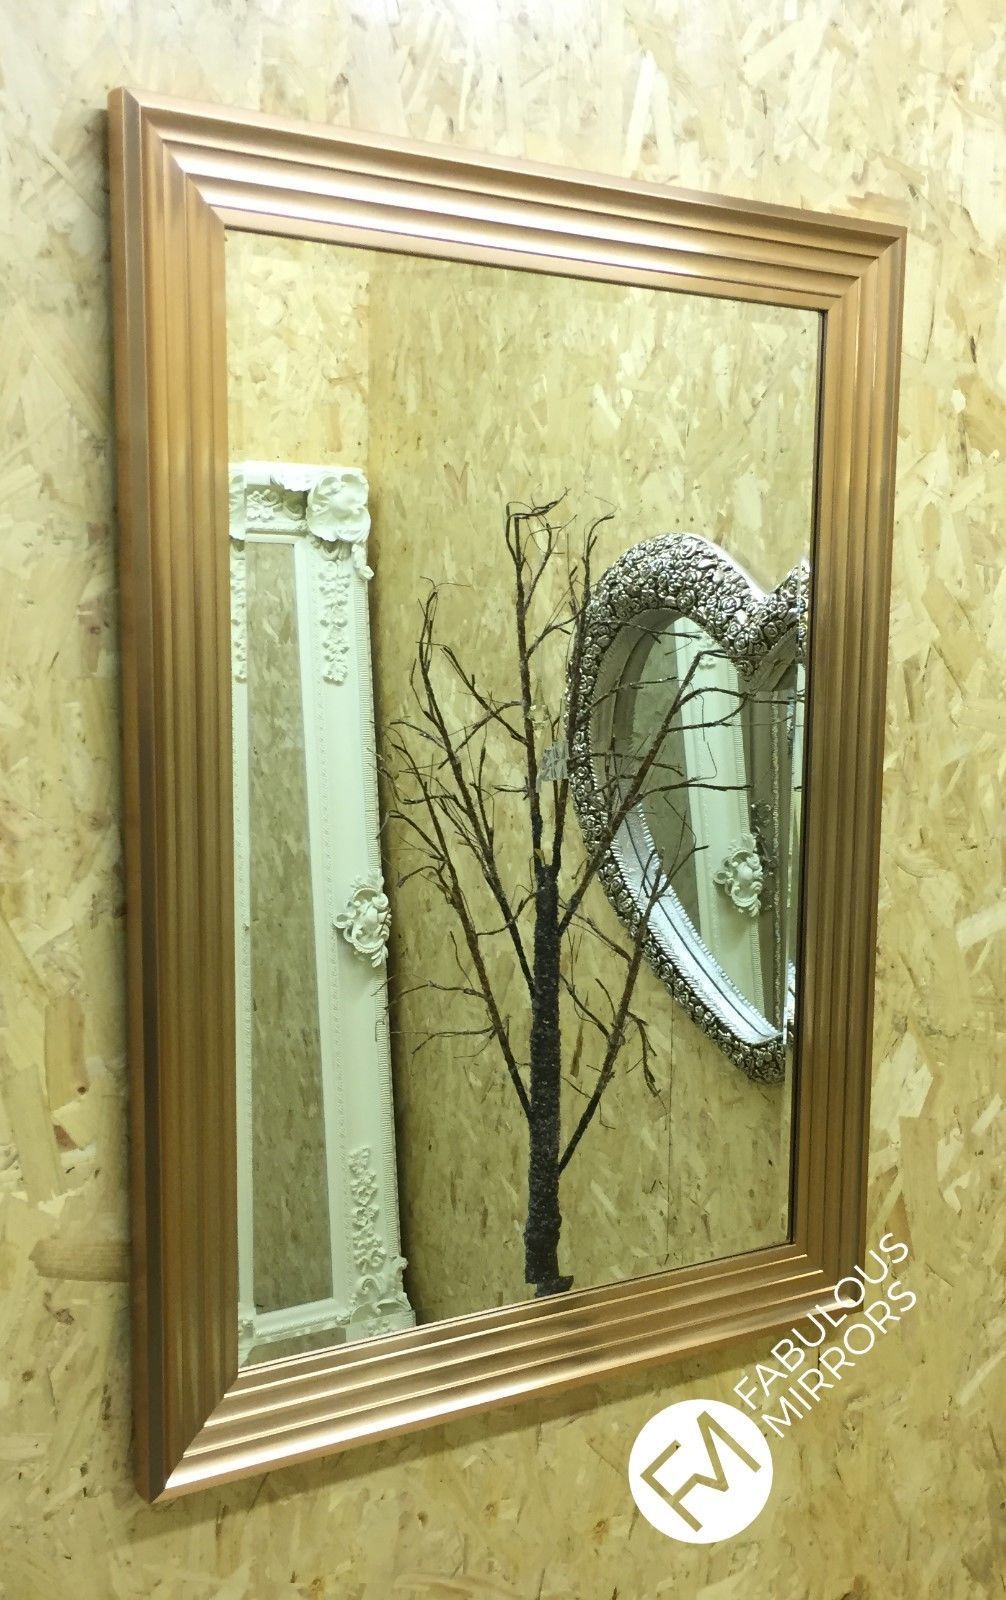 X Large Rose Gold Elegant Modern Stylish Wall Mirror Save S Pertaining To Modern Oversized Wall Mirrors (View 9 of 15)